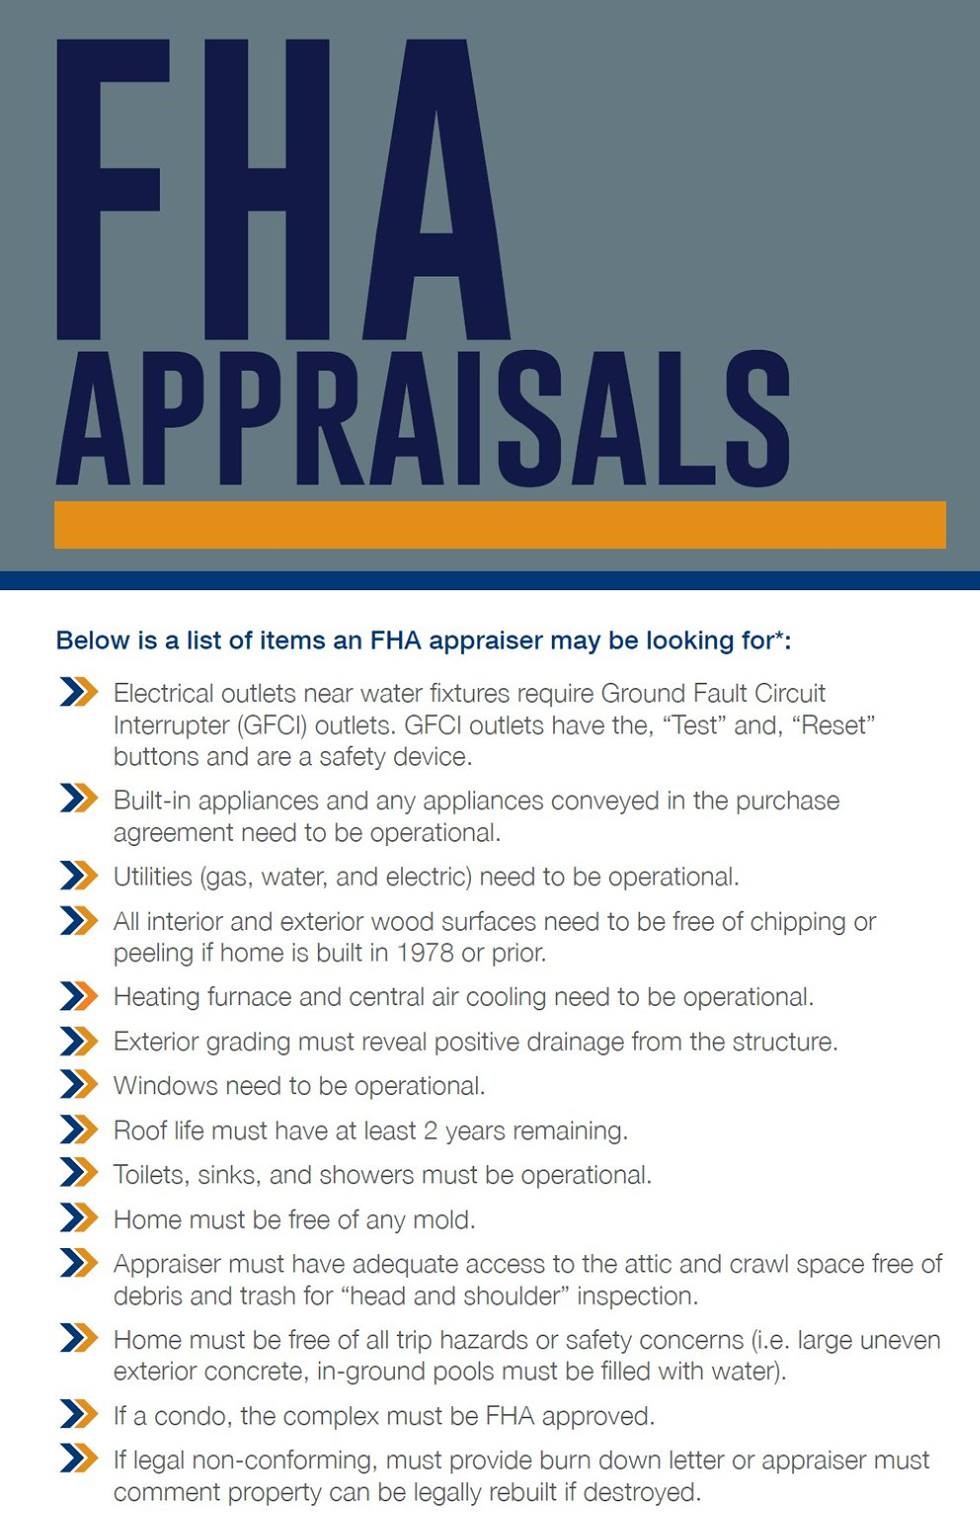 What are the FHA appraisal requirements?